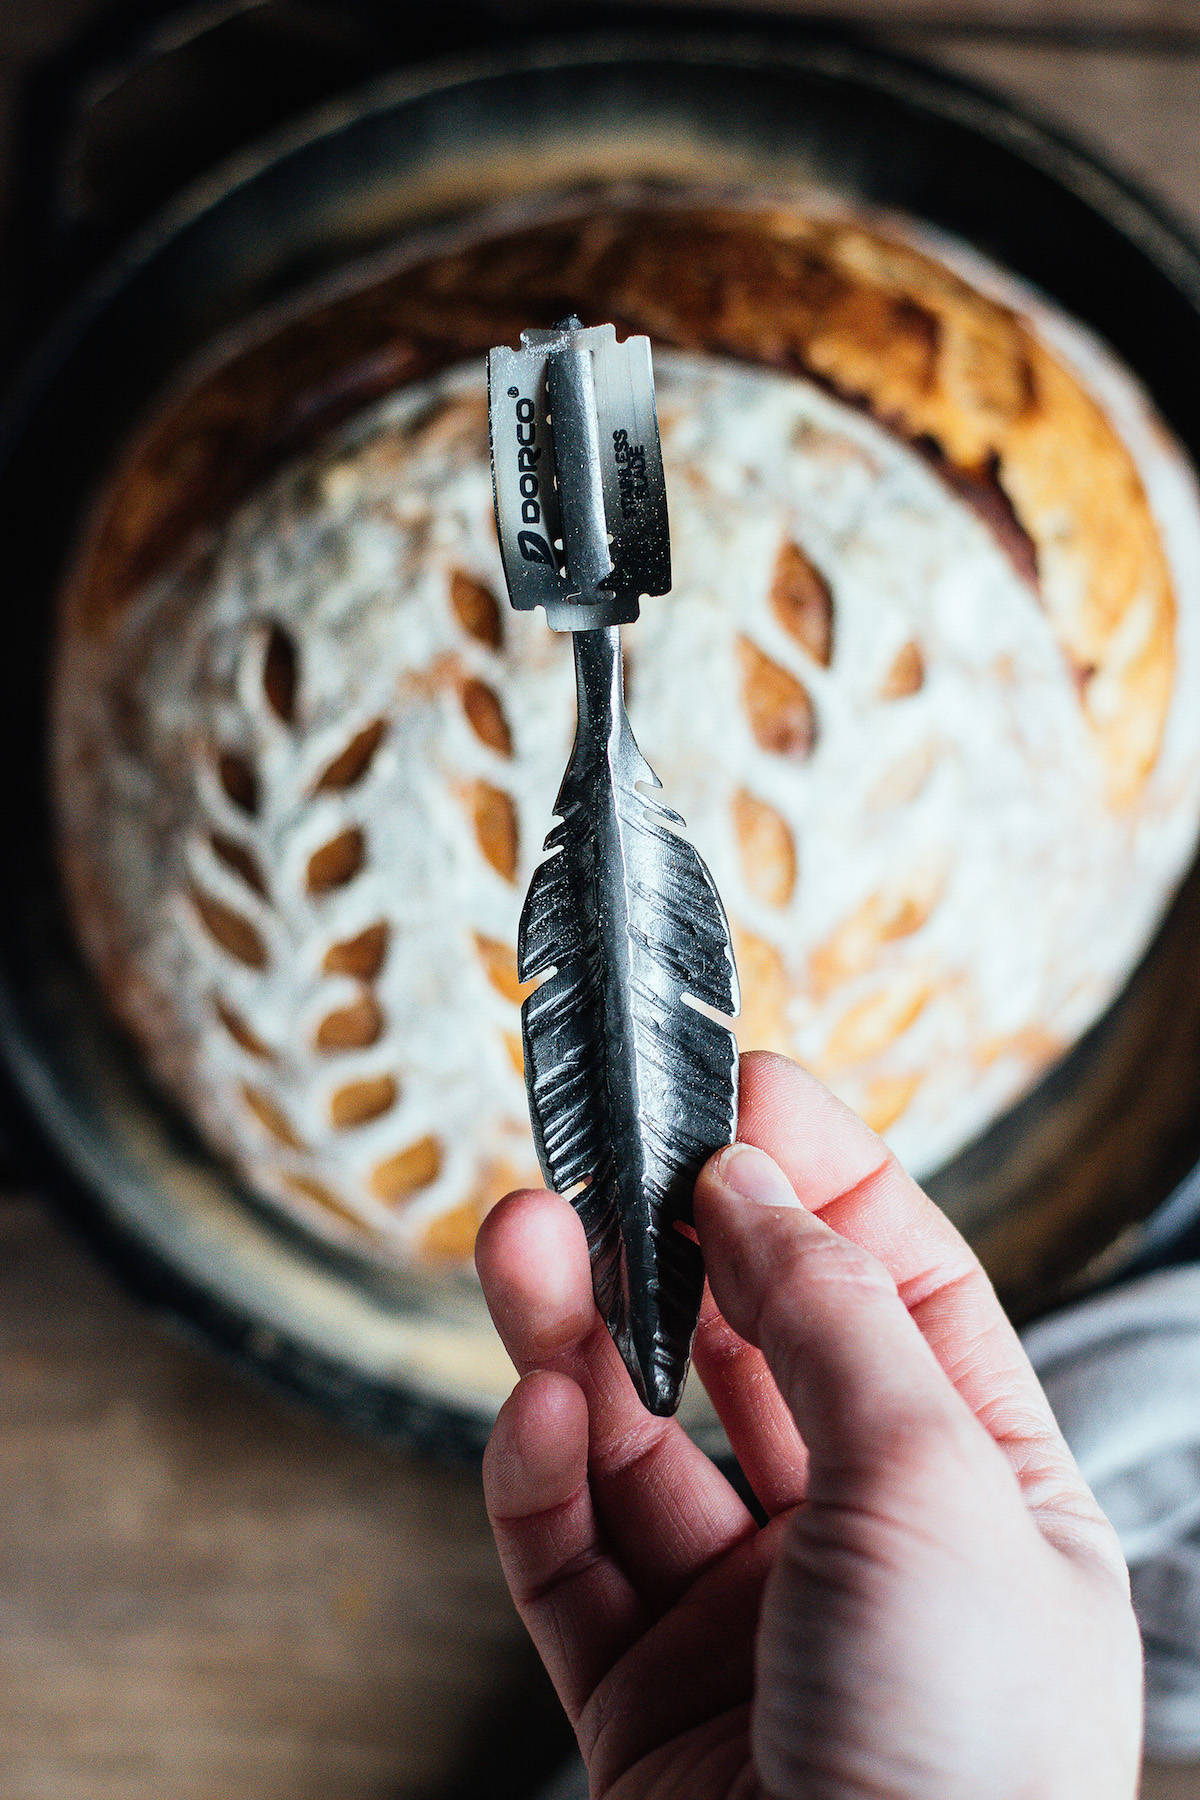 A bread lame, this one made by Avie Waterfall, is a tool used by artisan breadmakers. It holds a razor blade at a specific angle to create intricate designs in the loaf before it is baked. Photo: Submitted